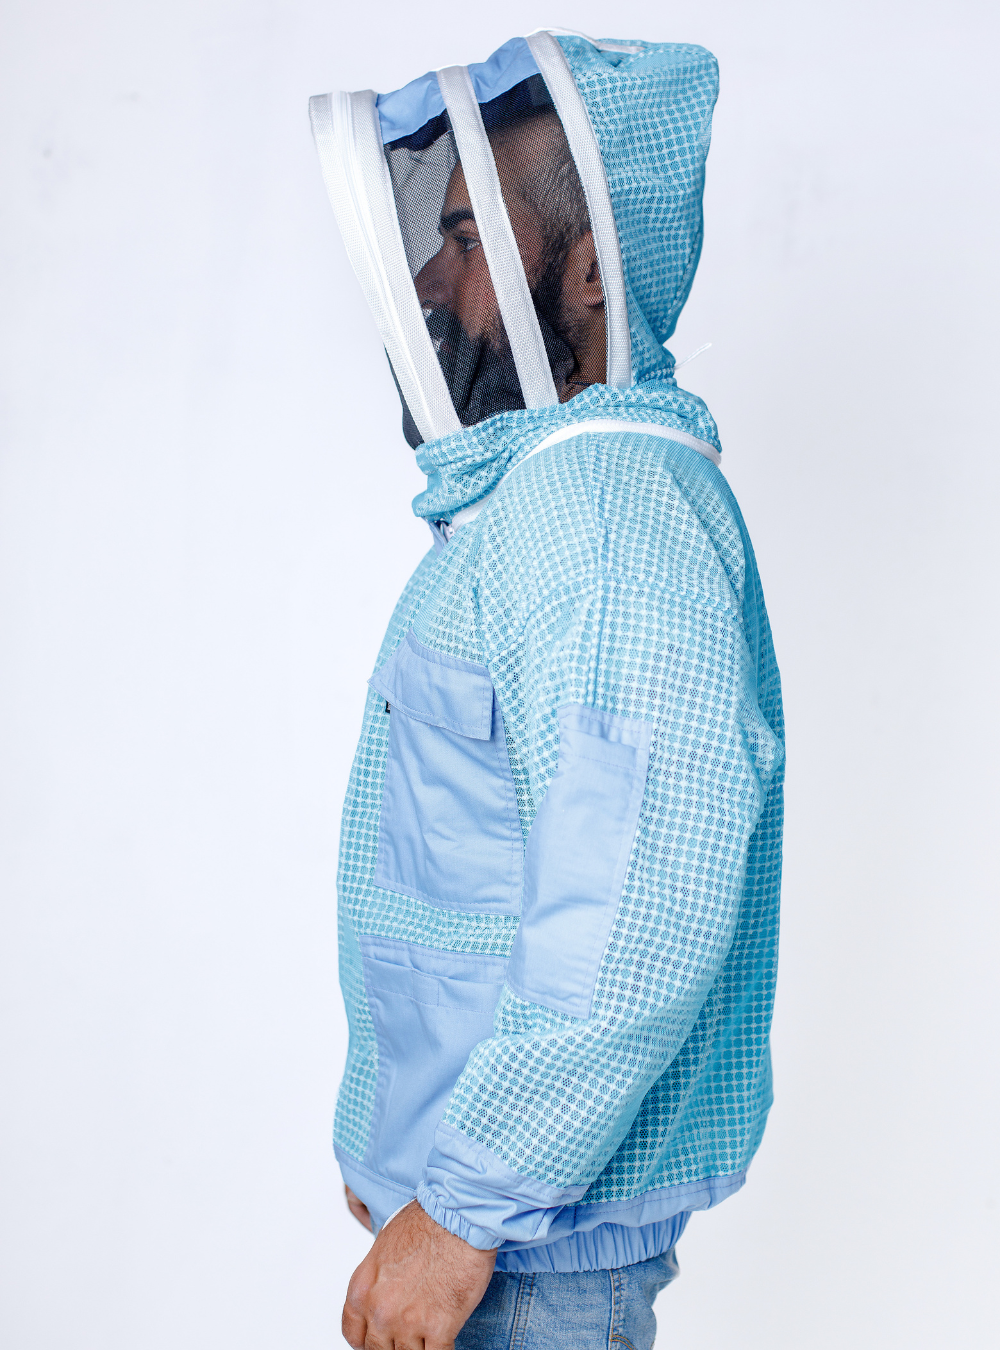   Aqua Blue Beekeeping jacket with adjustable hood and stretchable cuffs.